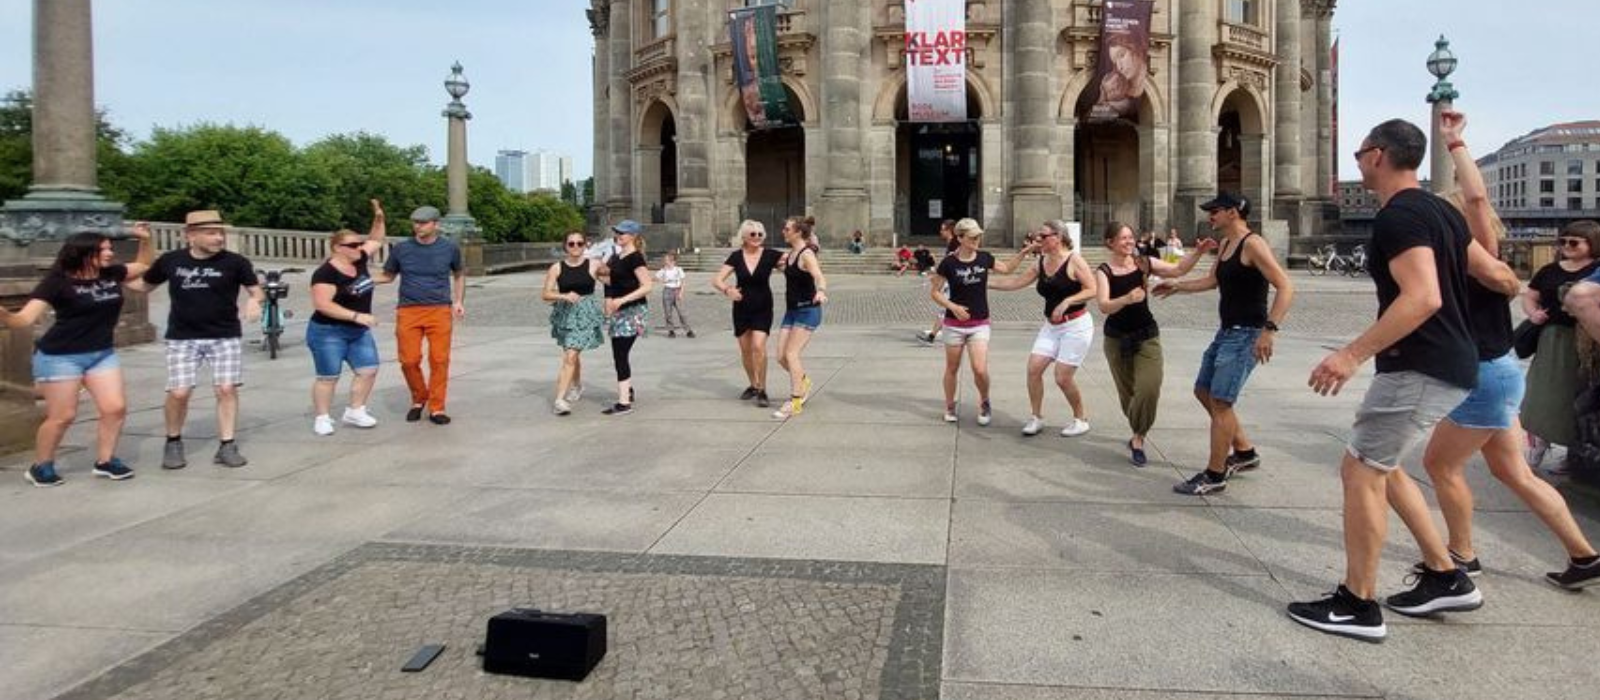 Group of people dancing Rueda de Casino on a sunny day in front of historic building in Berlin